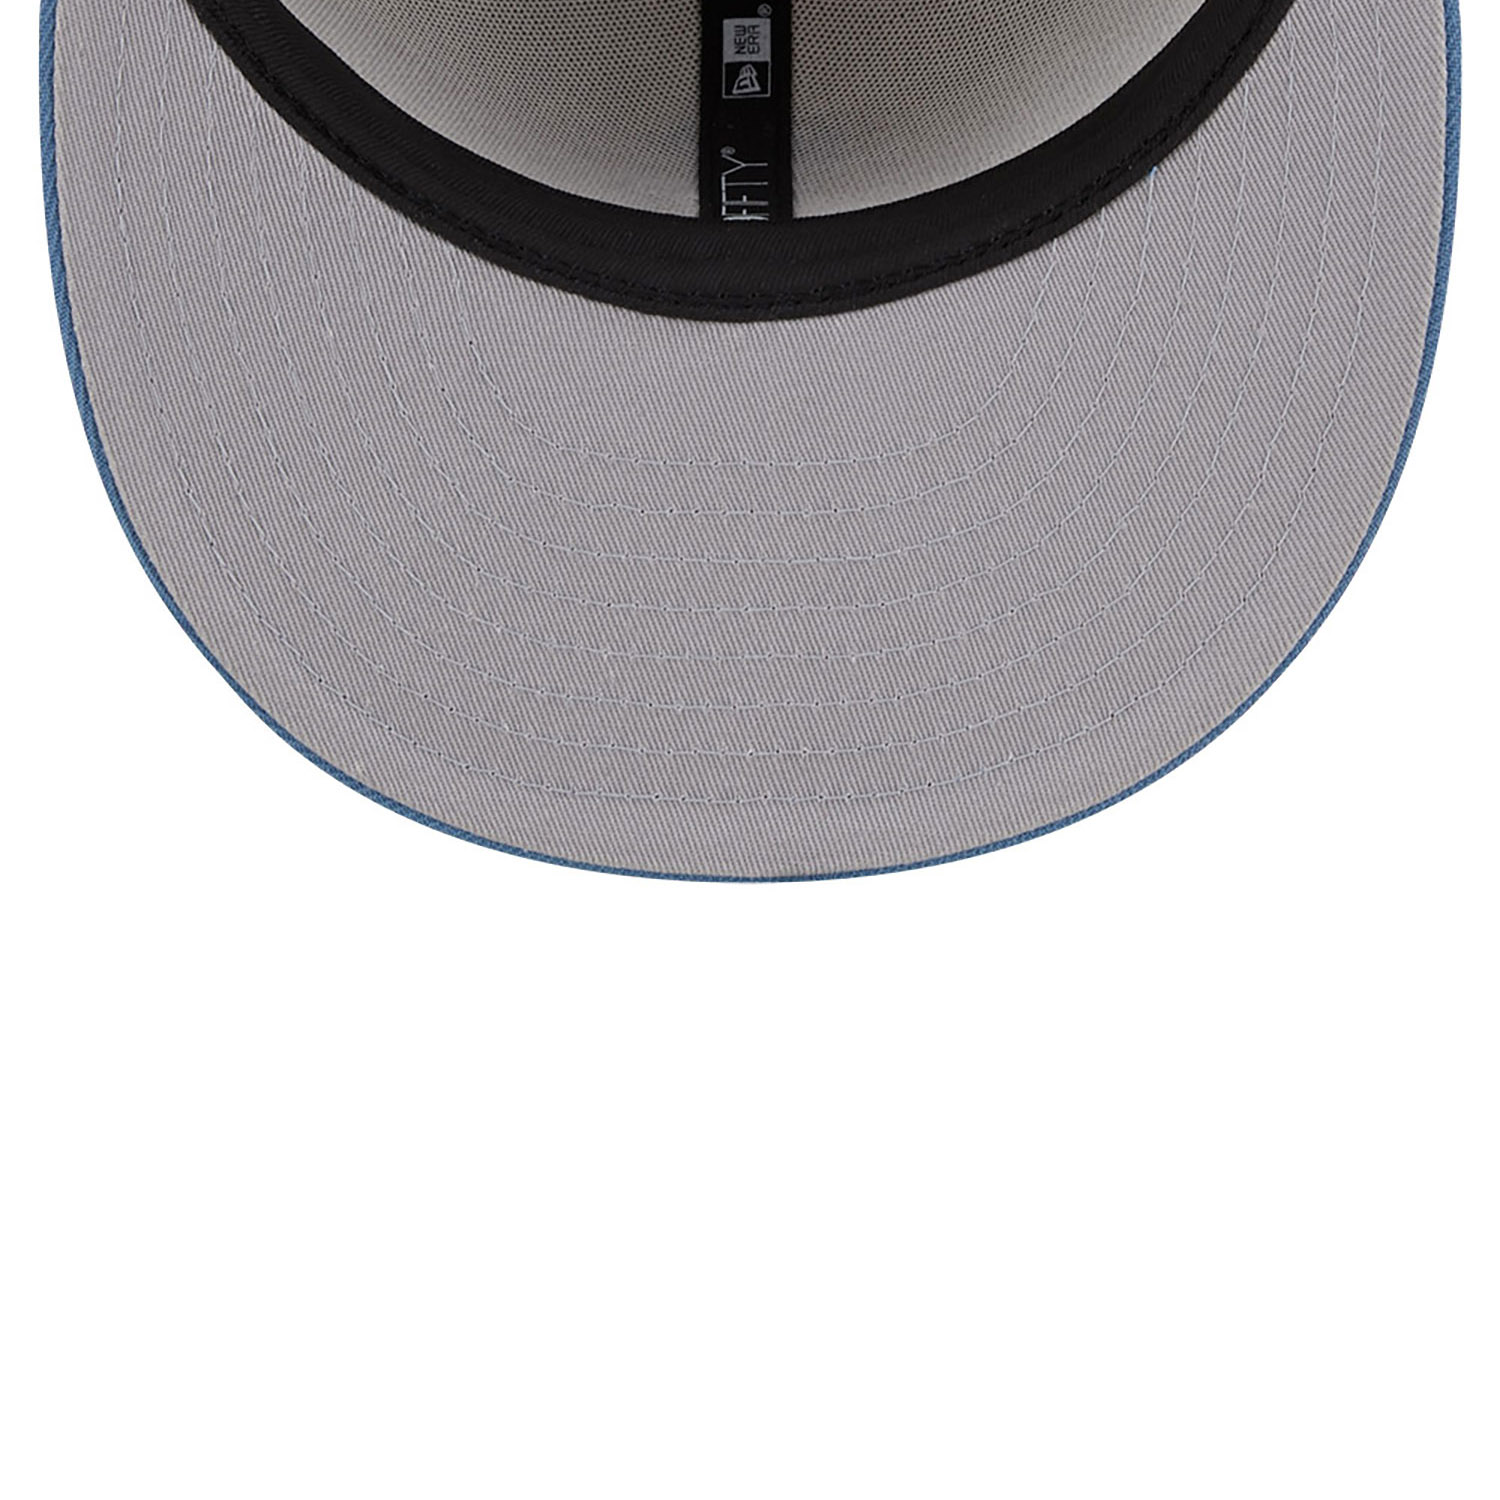 Chicago White Sox Colour Brush Light Beige 59FIFTY Fitted Cap